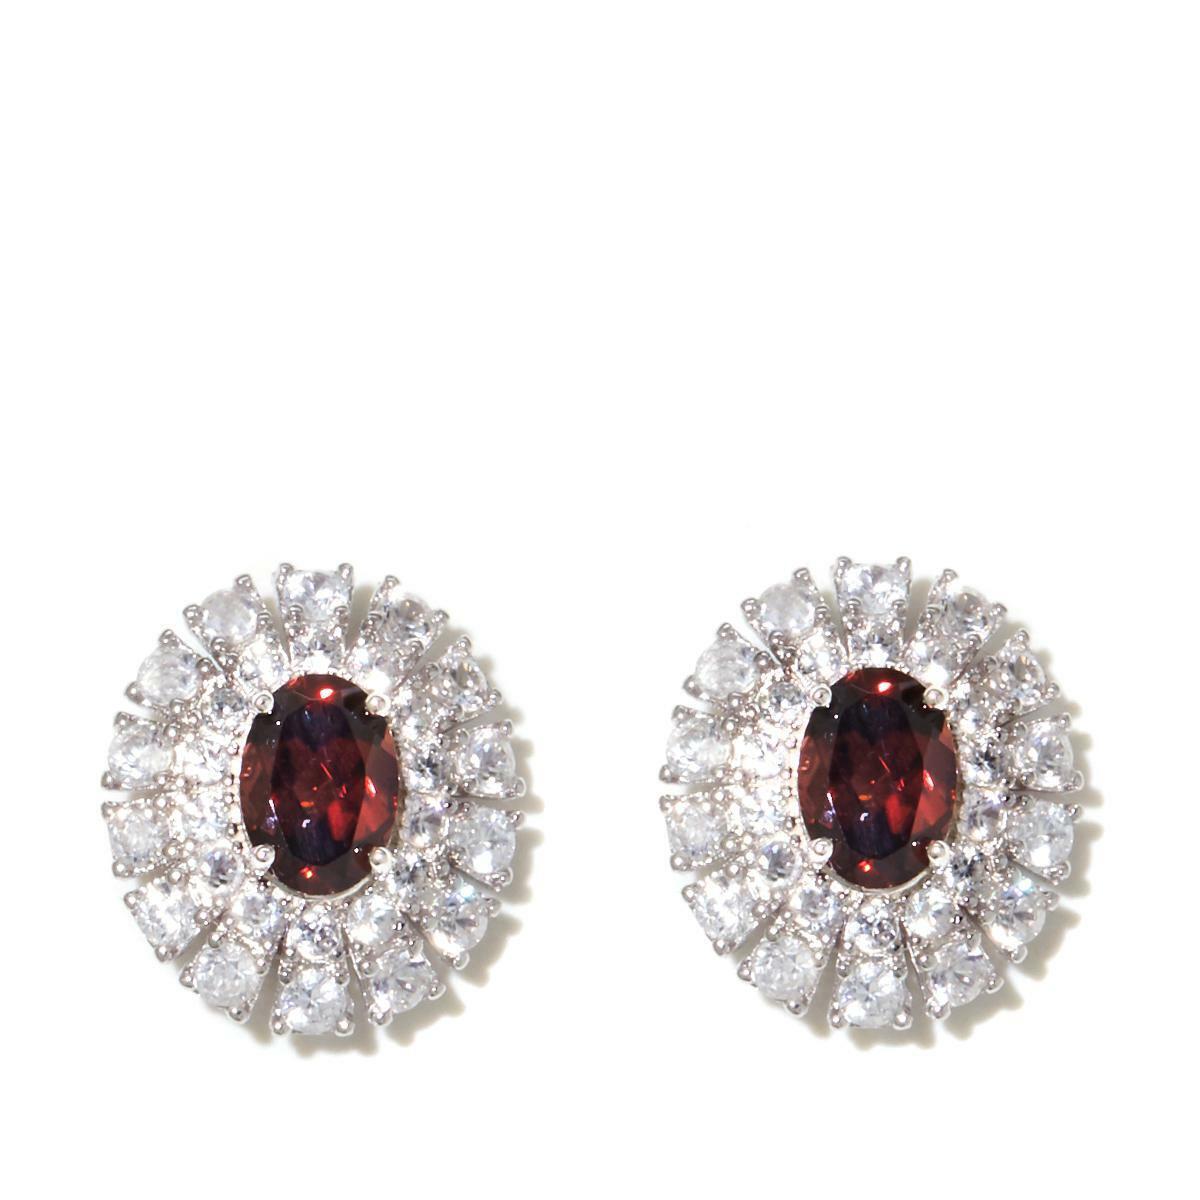 Colleen Lopez 3.72Ct Natural Zircon Sterling Silver Stud Earrings Hsn $239